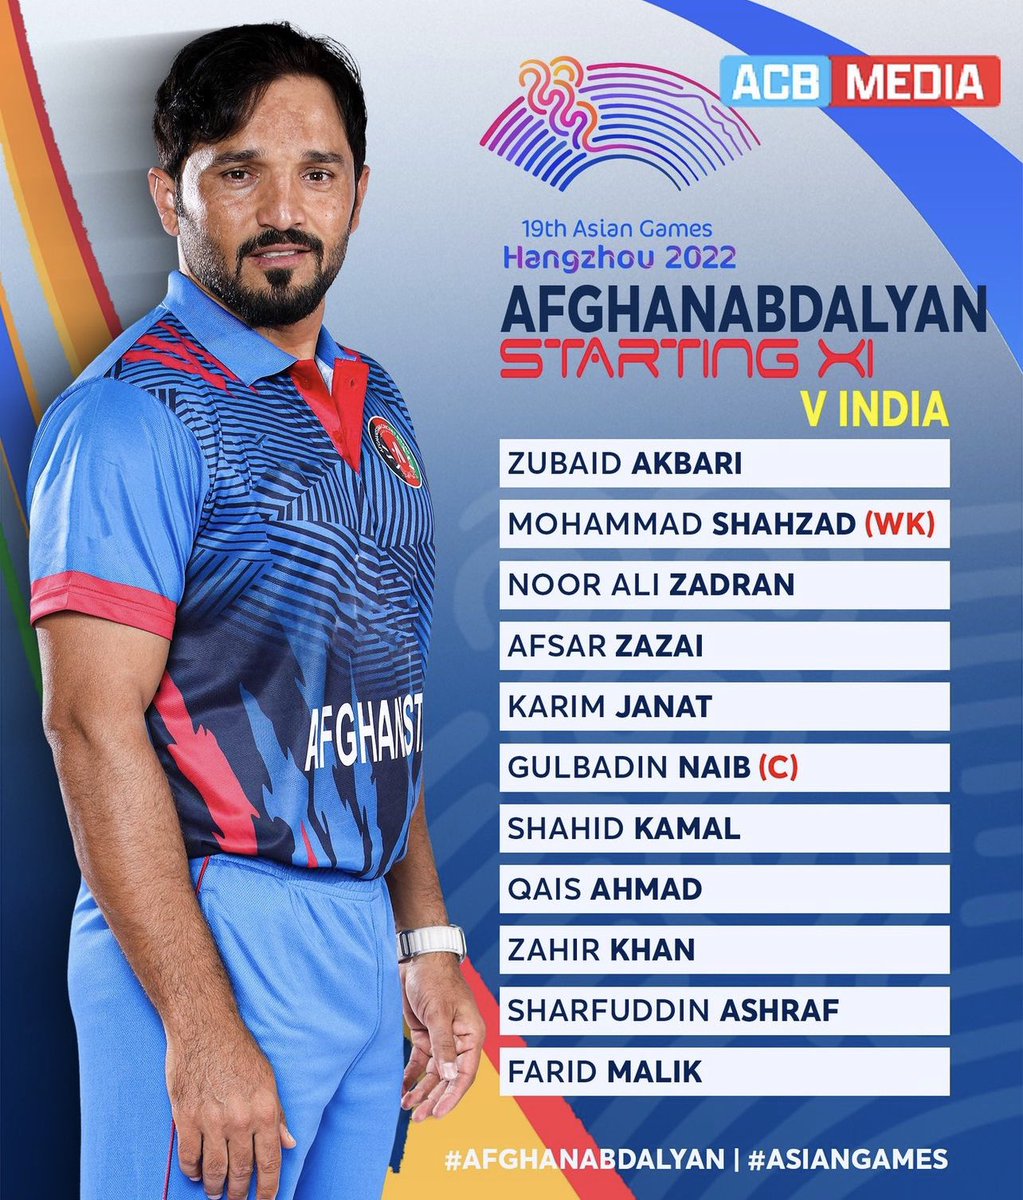 Afghanistan vs Bharat🤩 

Today at The Asian games cricket final #AfghanAbdalyan is facing a tough challenge against the experienced Bharat team. Despite being the underdogs, the Afghan team has shown great determination and skill throughout the tournament. Best of luck to our